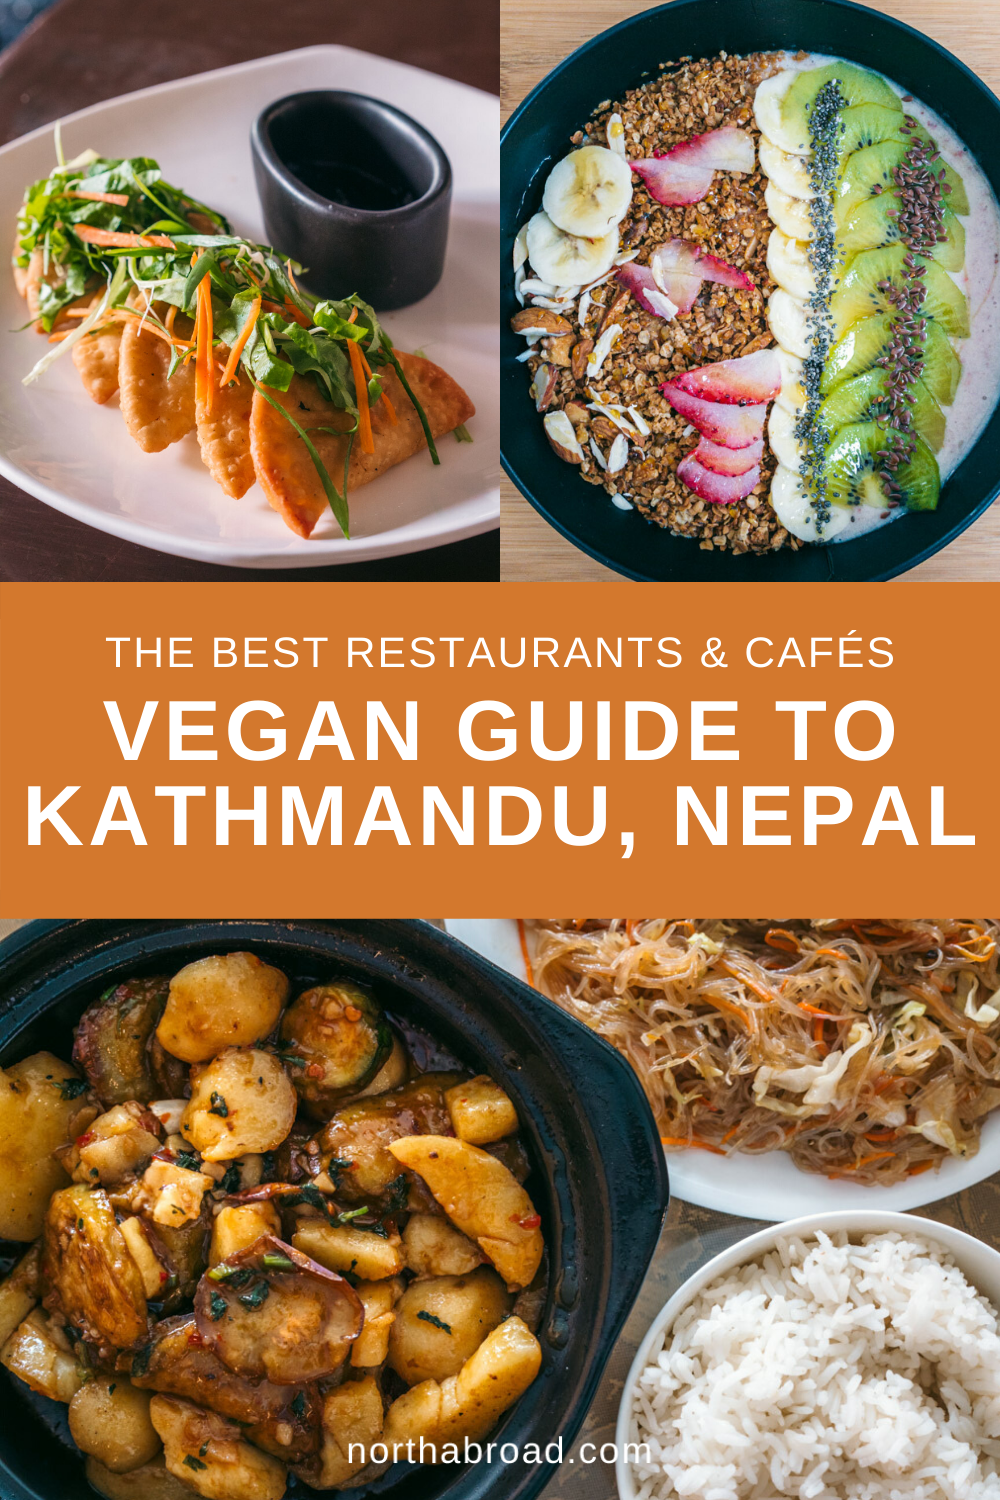 Everything you need to know about finding the most delicious vegan and vegetarian places in Kathmandu, Nepal